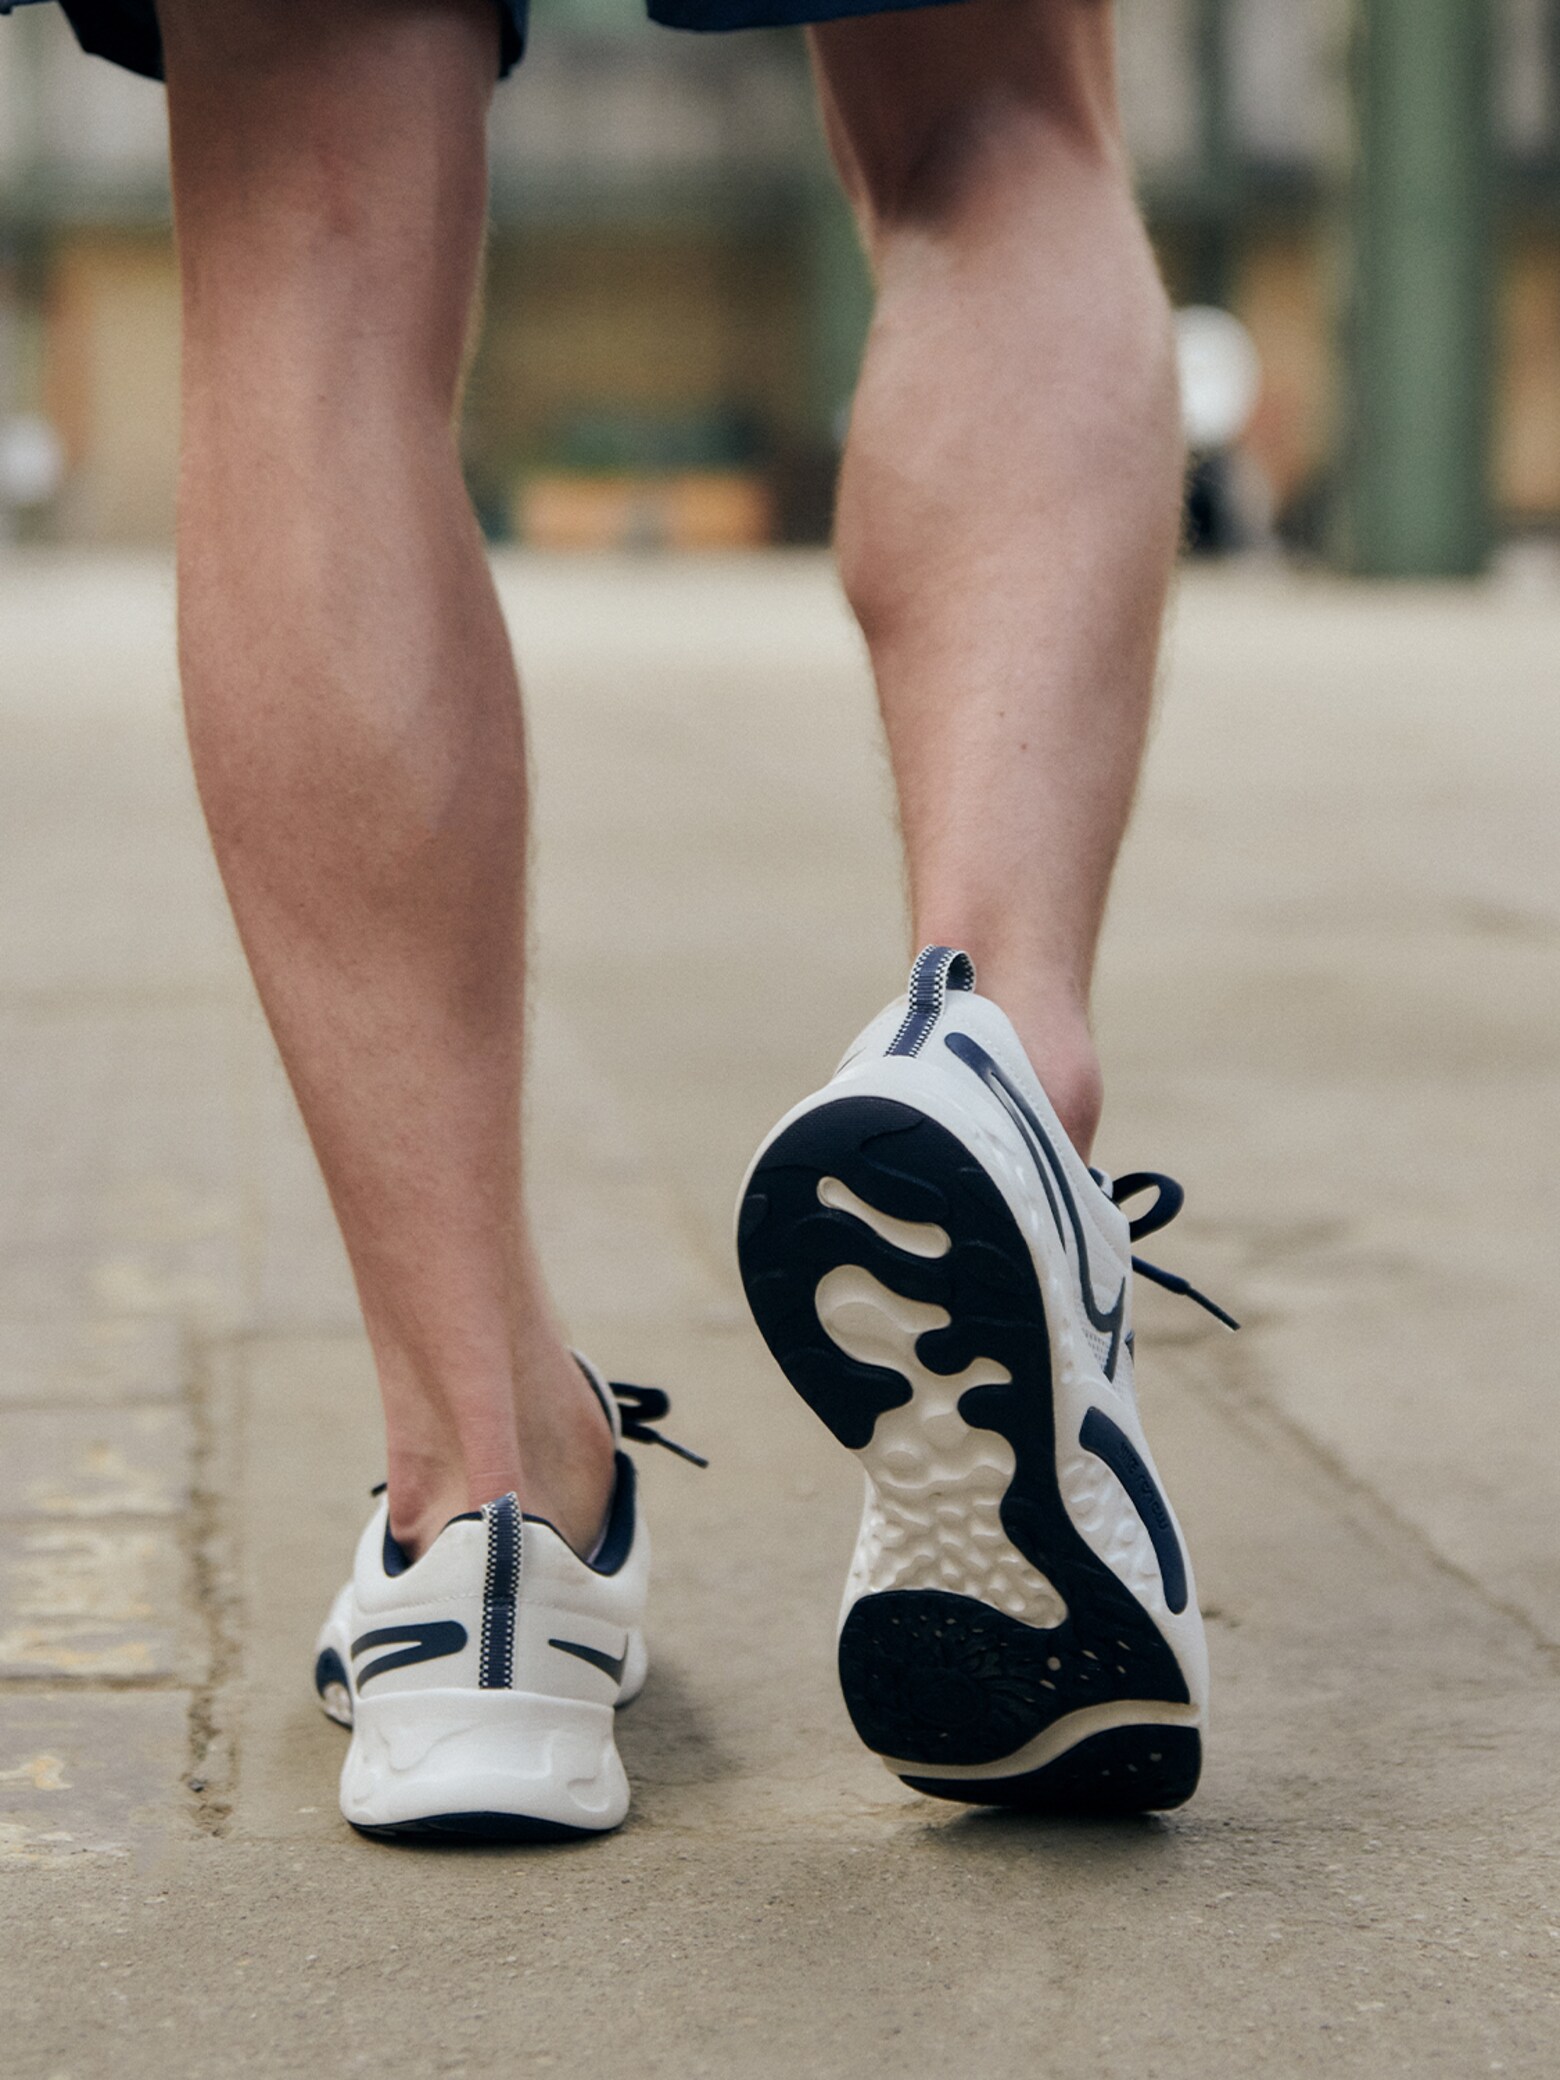 What matters Fitness shoe guide